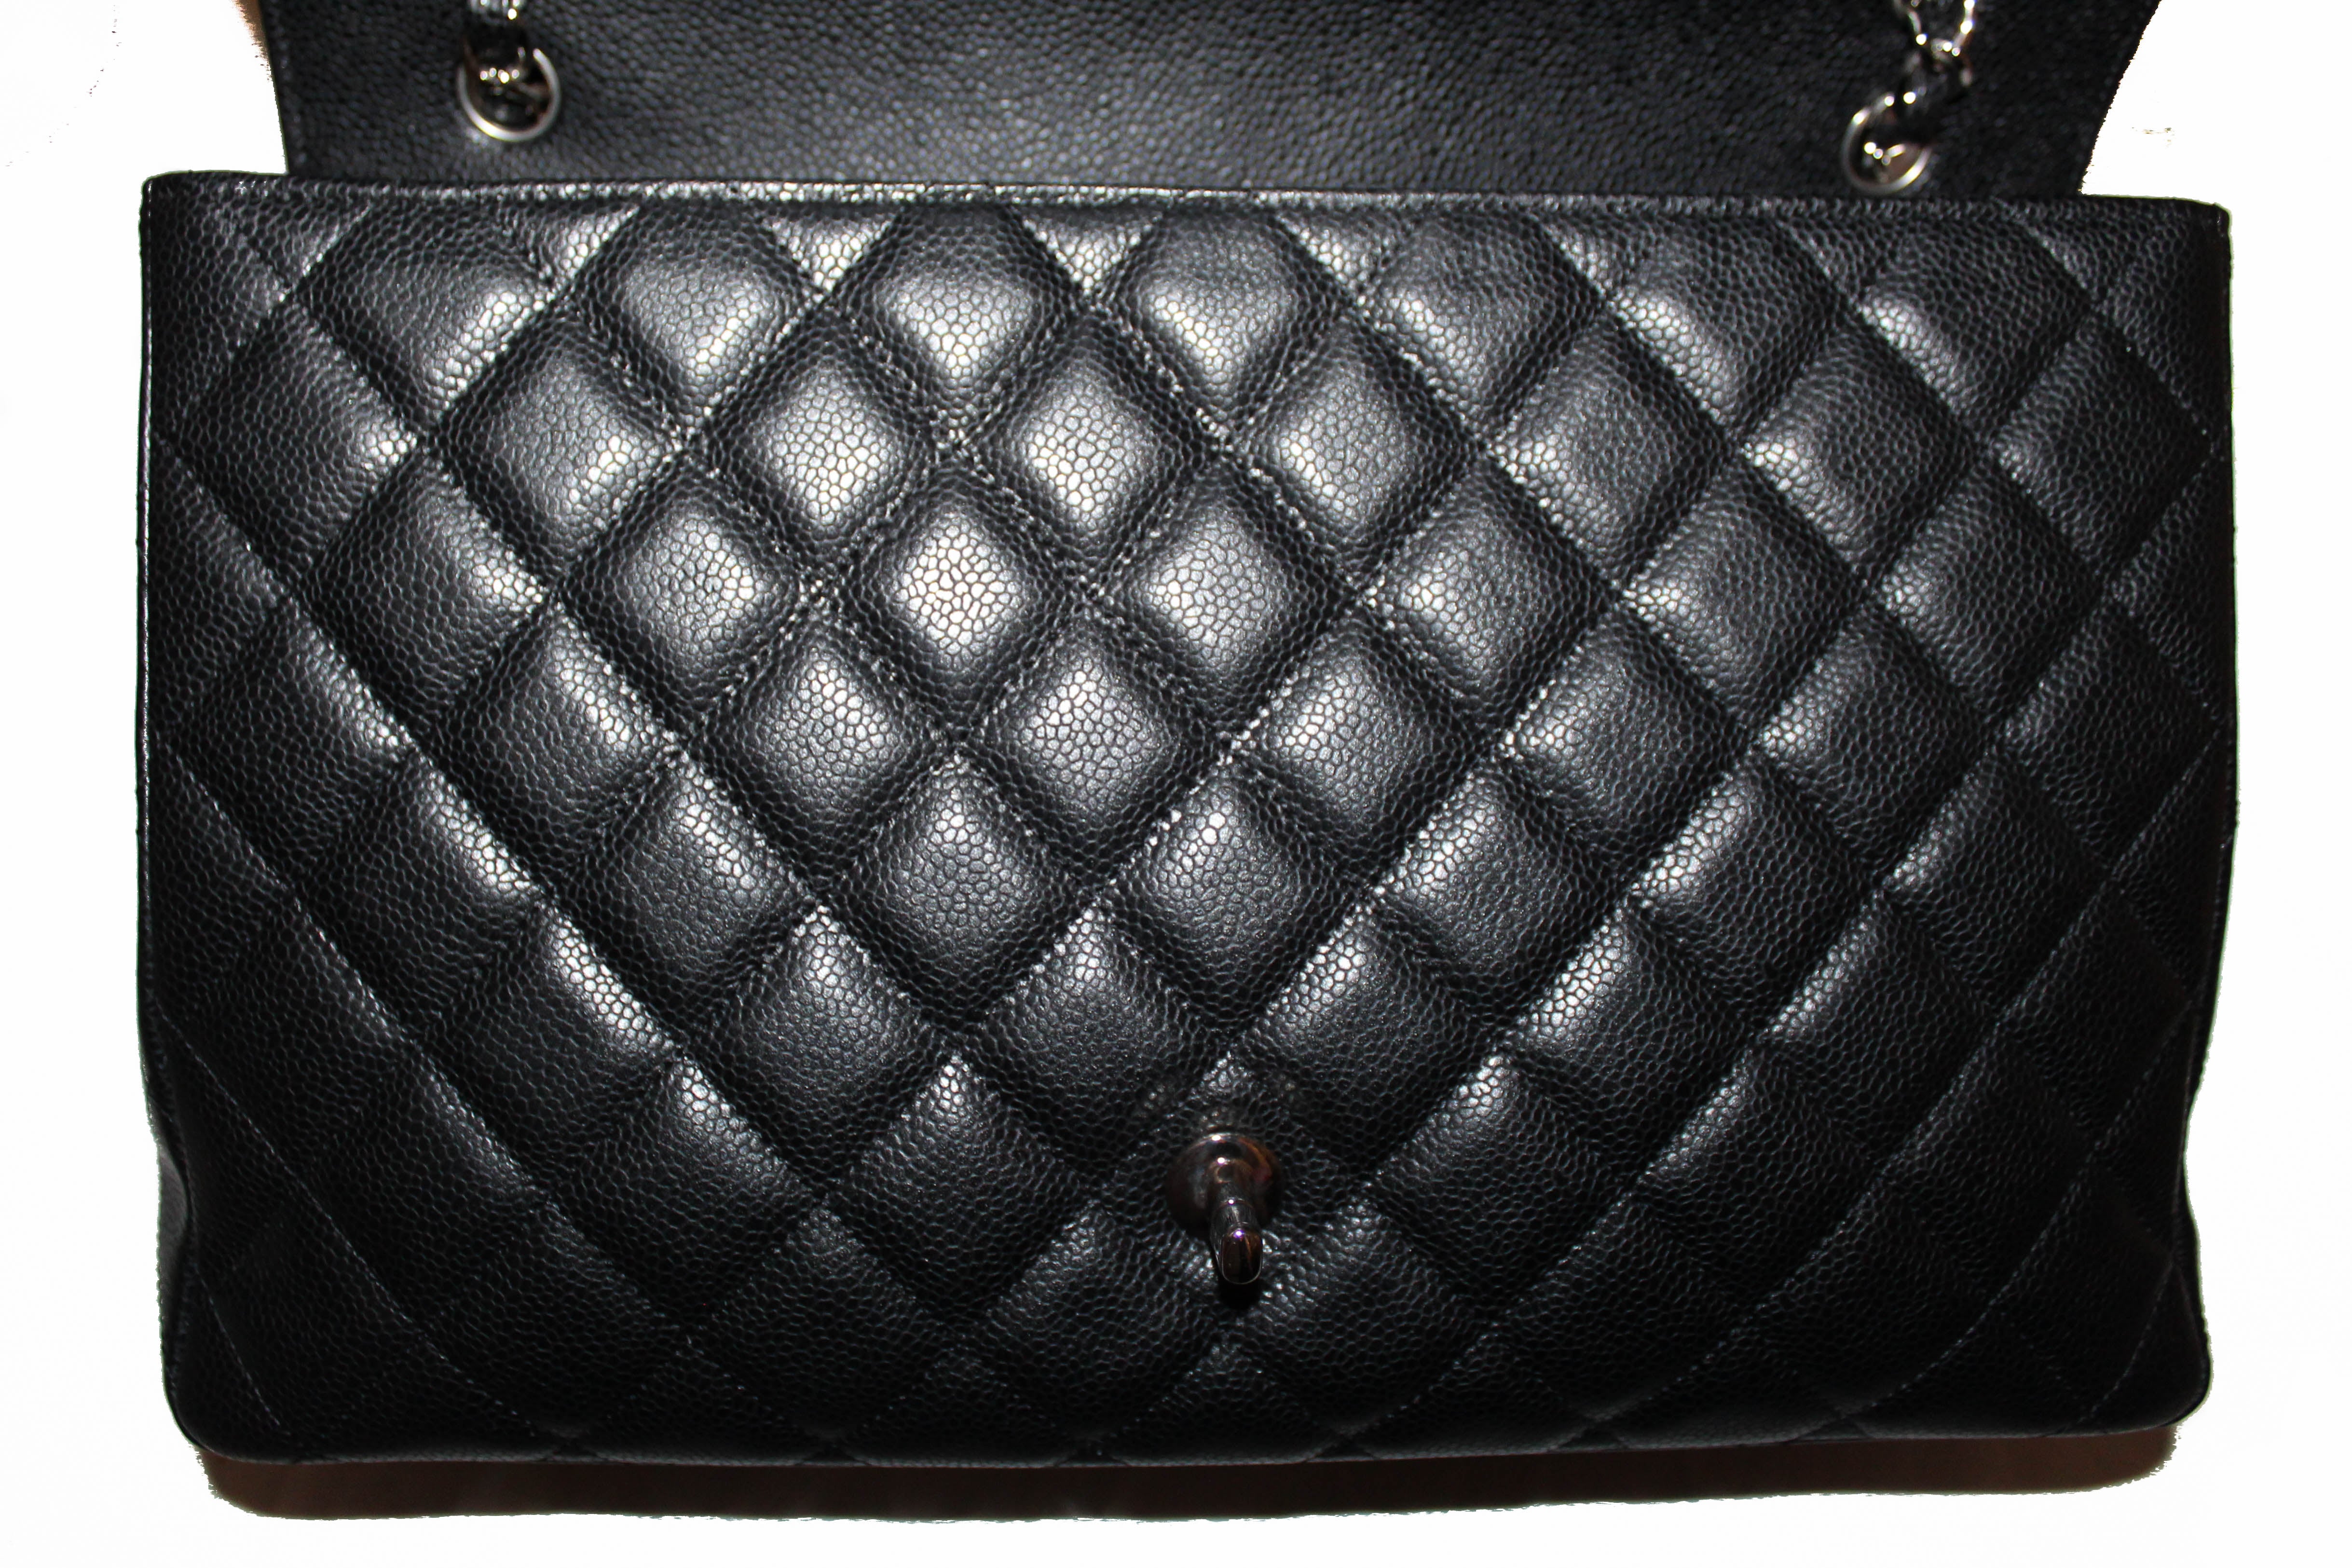 REPLICA CHANEL BAG ACCEPTED AT FASHIONPHILE? Comparing quotes to my AUTHENTIC  BAGS + GIVEAWAY - YouTube